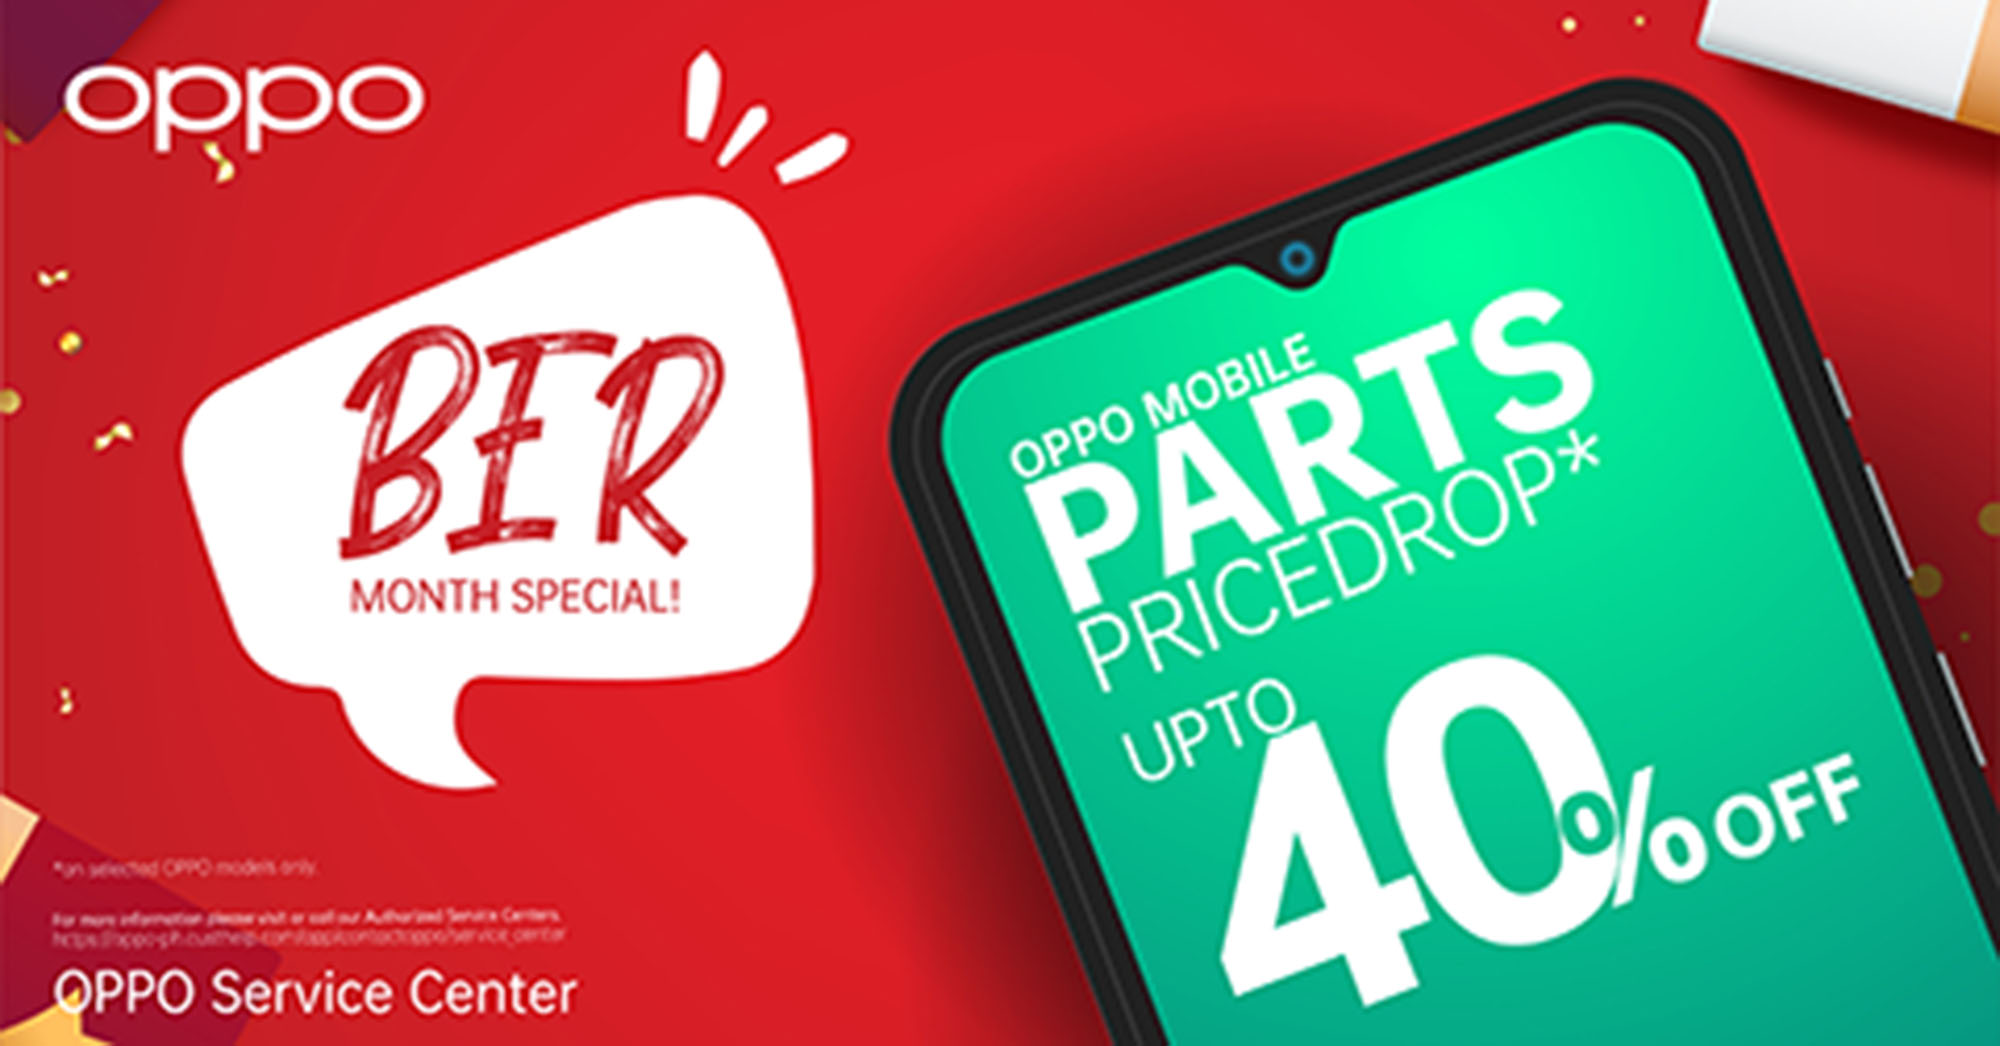 Rack up to 40% off on select service parts in all OPPO Service Centers nationwide